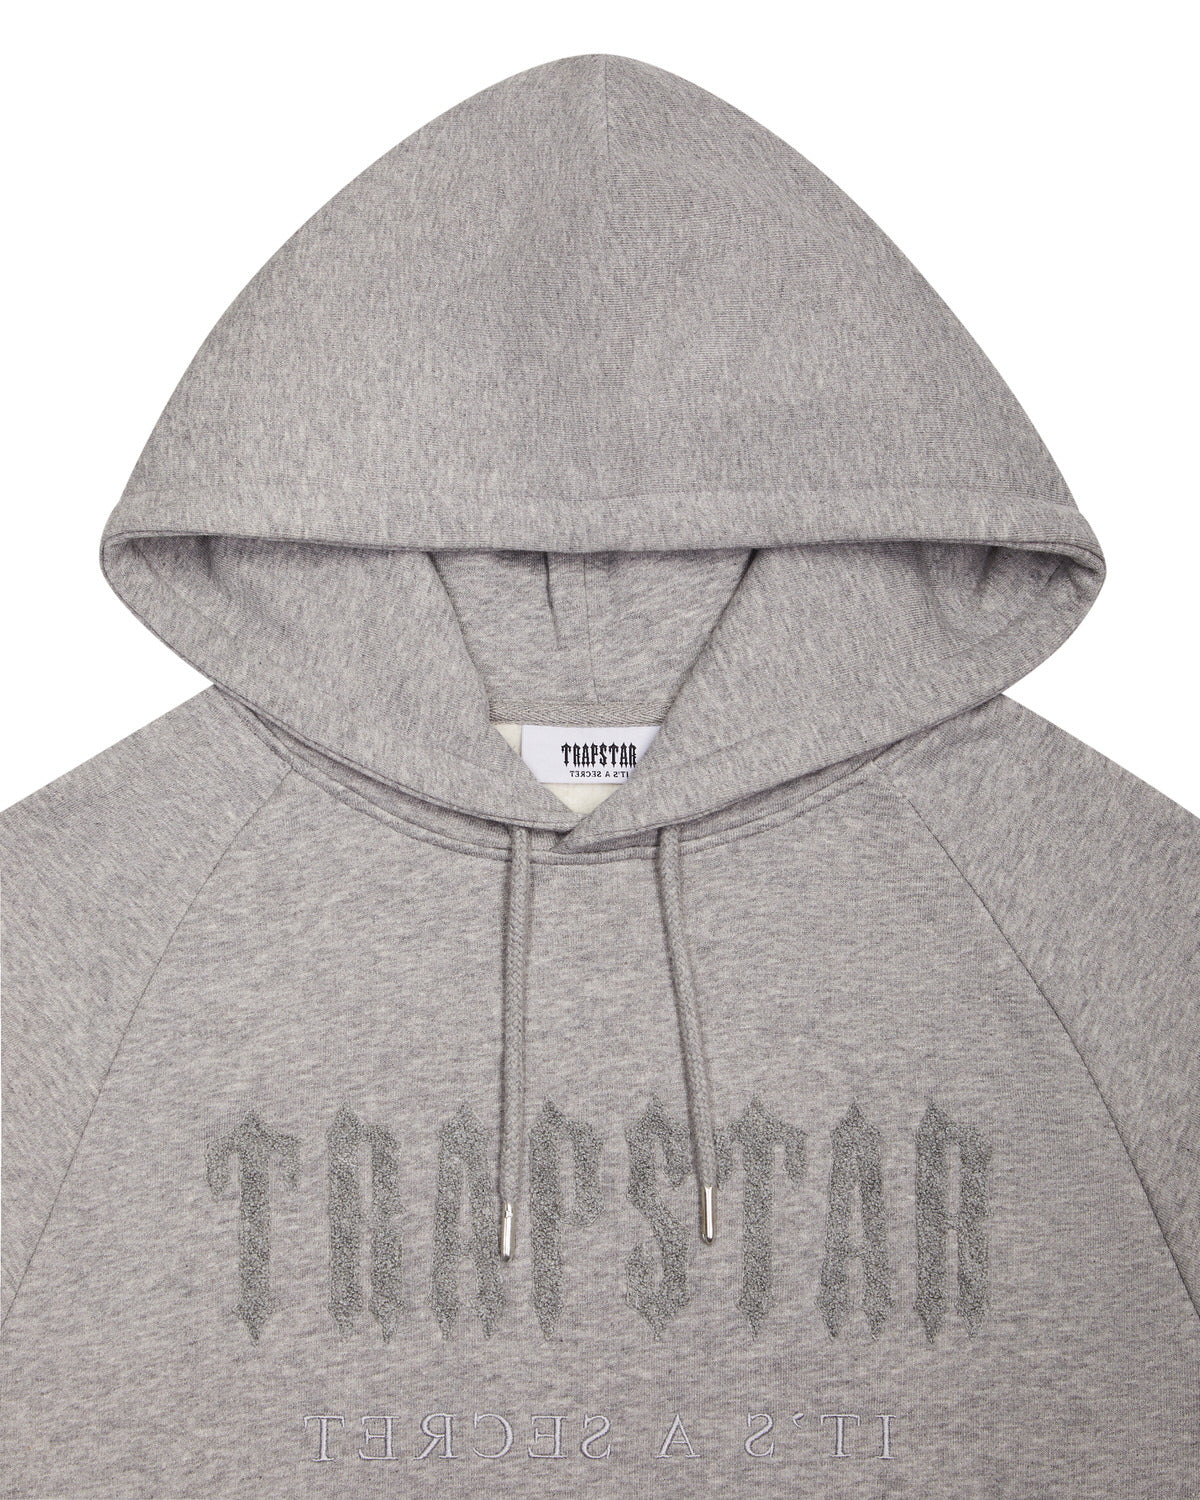 Chenille Decoded Hoodie - Grey